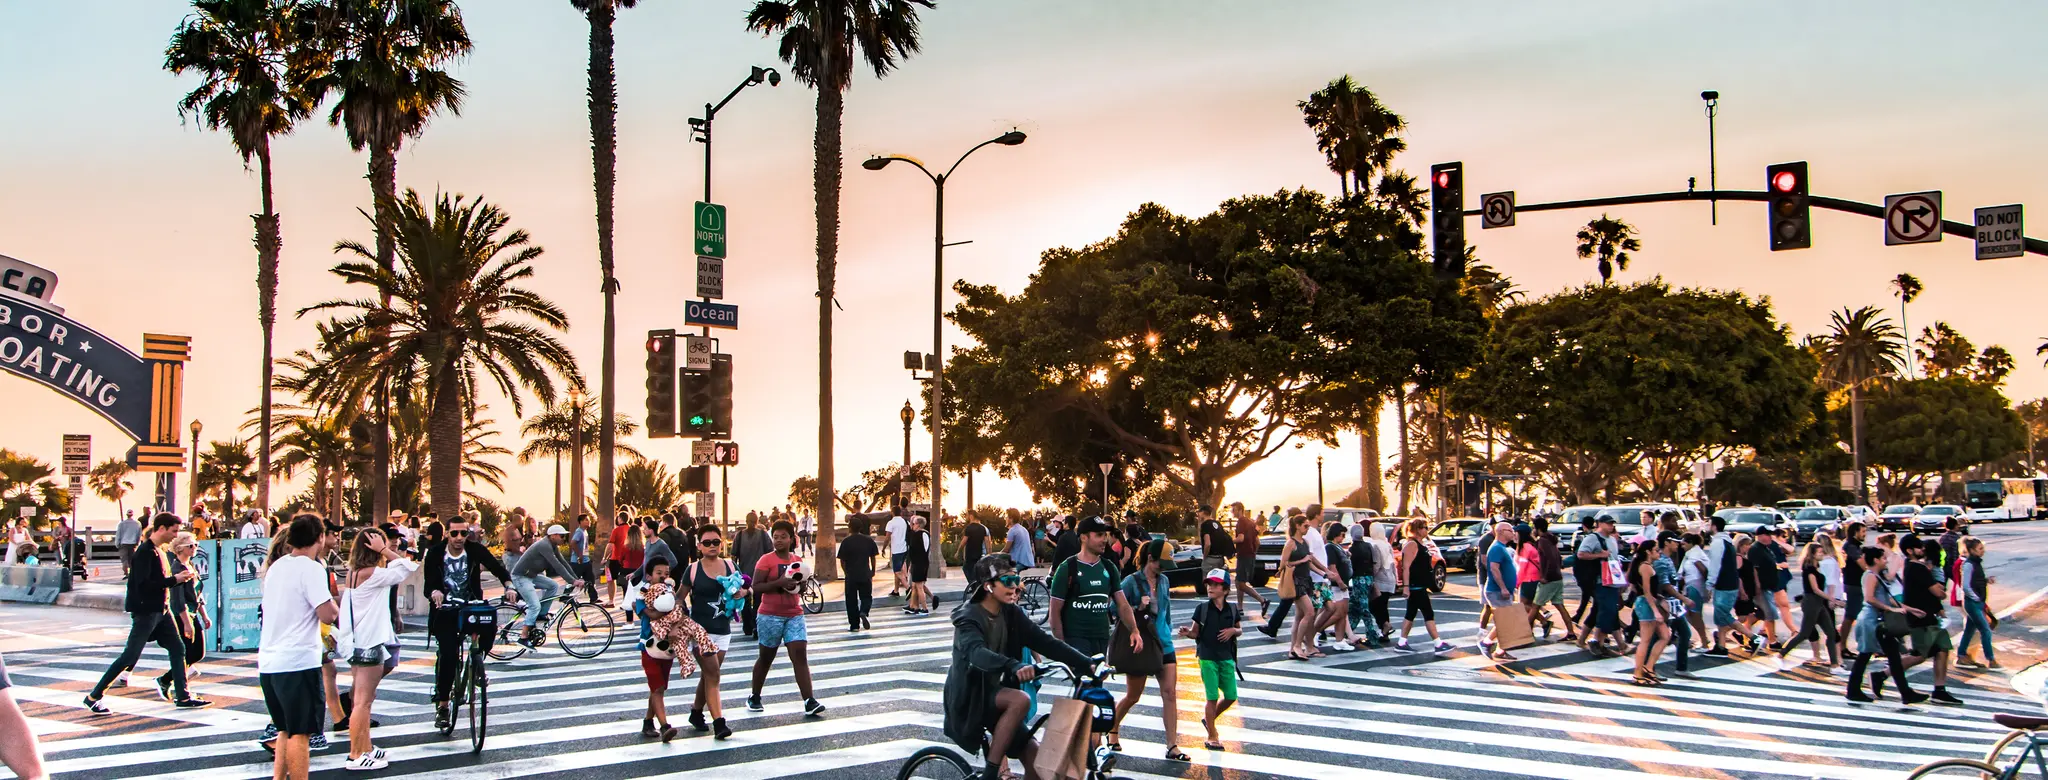 crosswalk in los angeles with palm trees and people